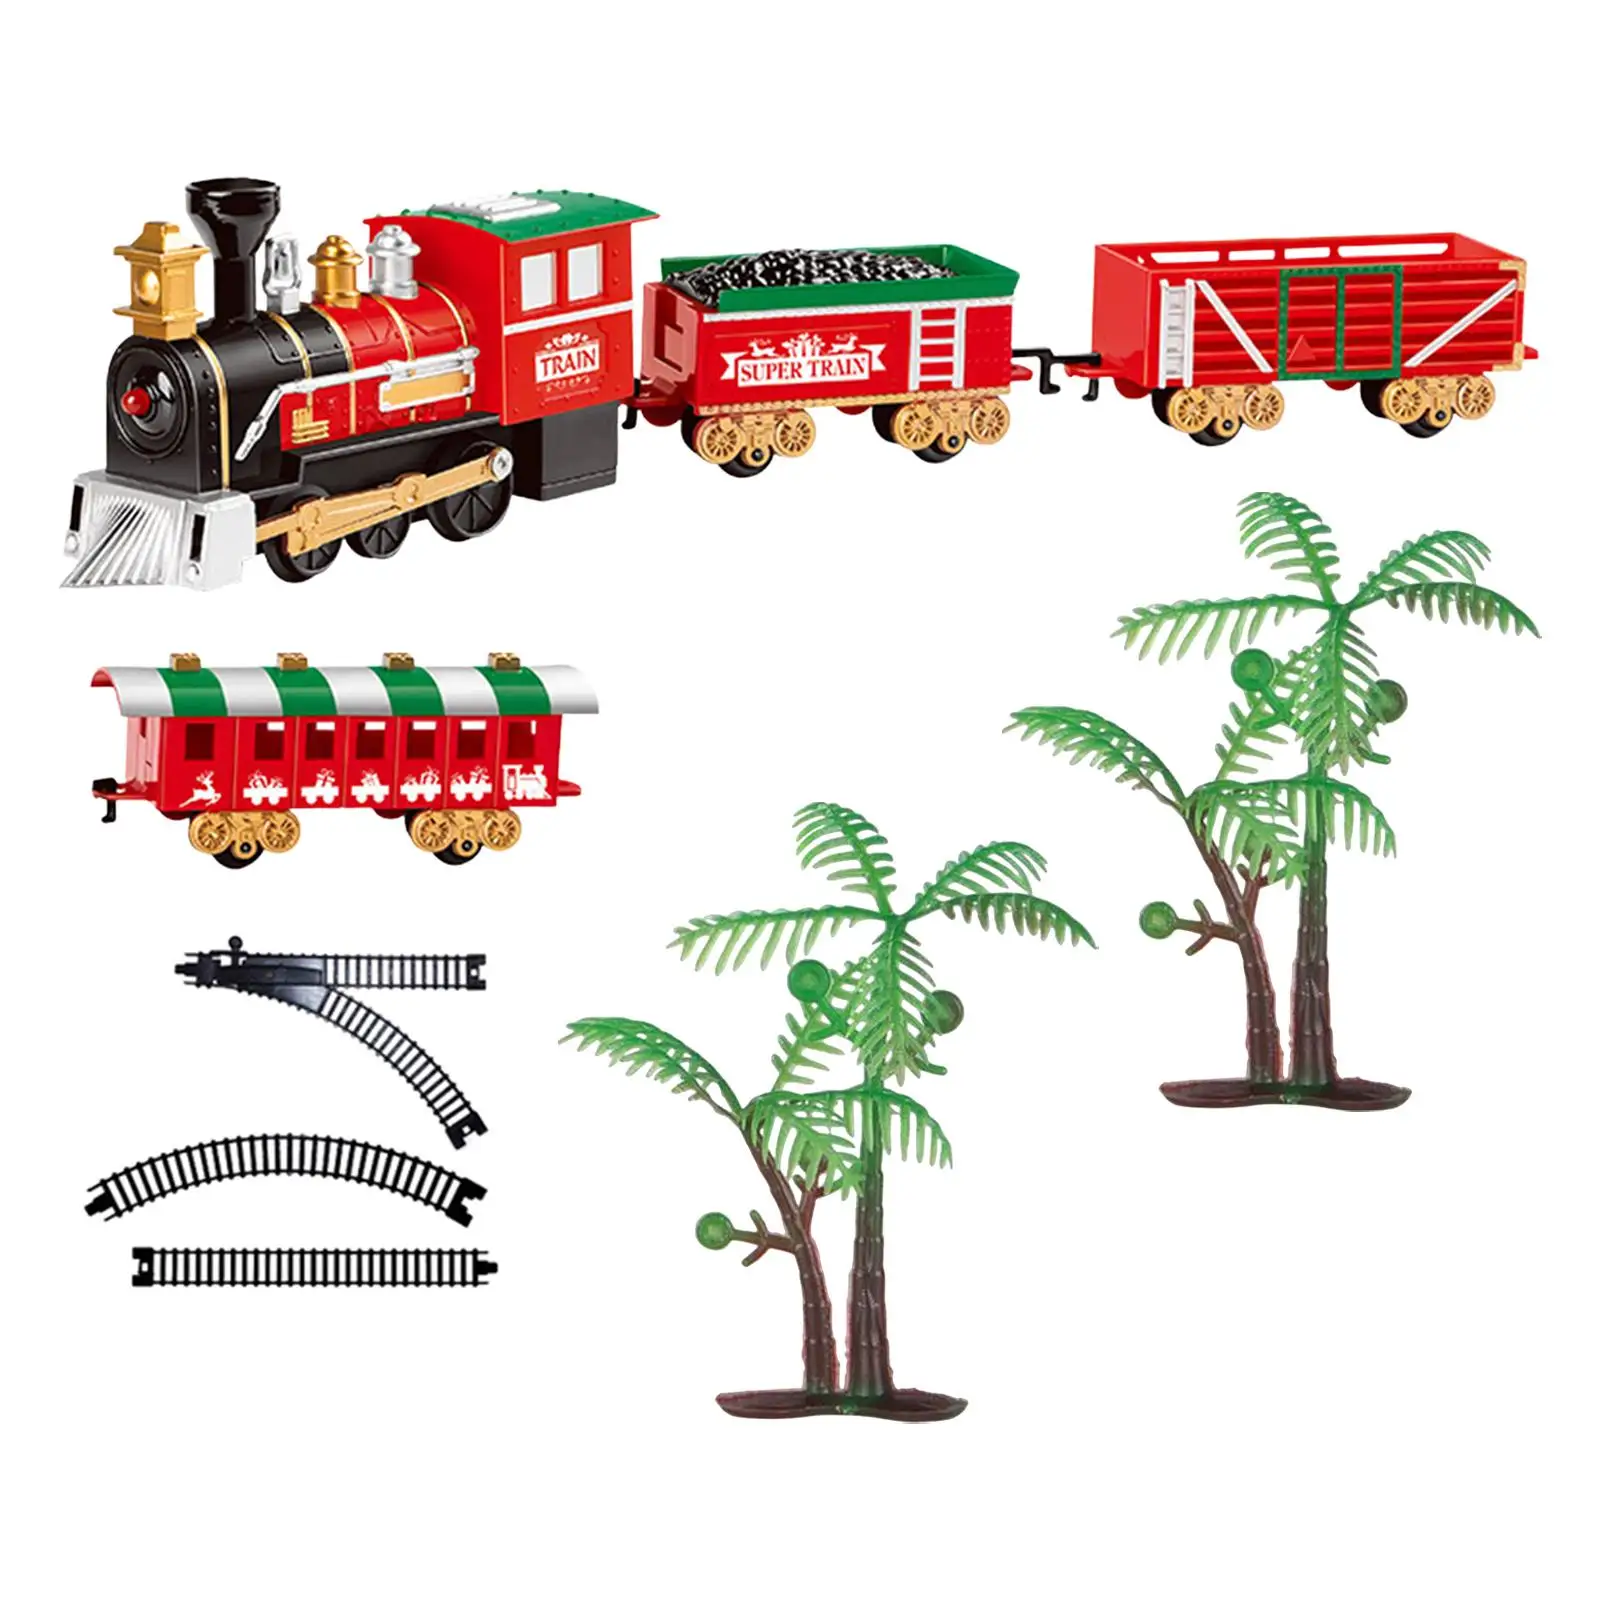 Electric Christmas Toy Train Building Construction Set Educational Learning Toy Railway Track Set for Preschool Children Kids